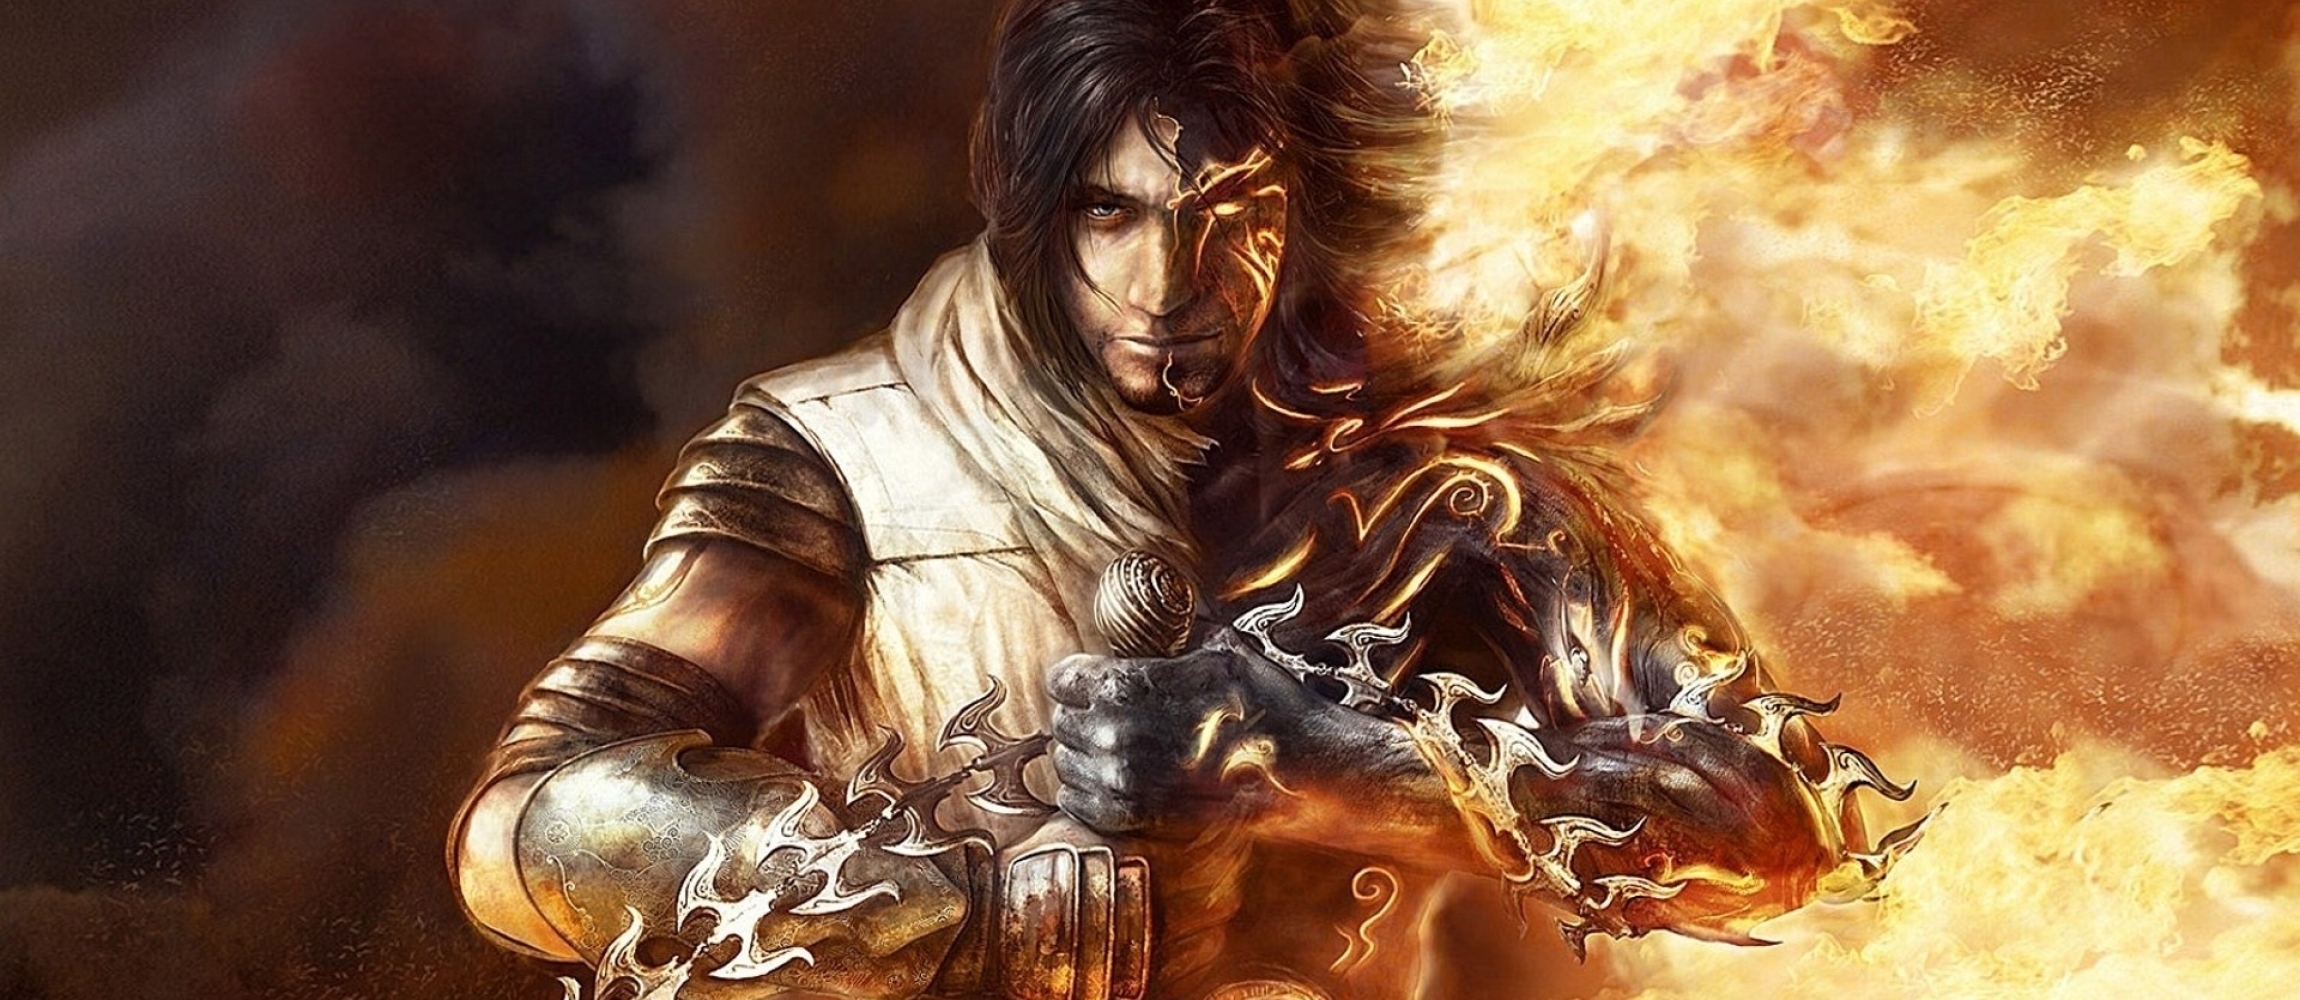 Prince of persia the two thrones steam фото 76